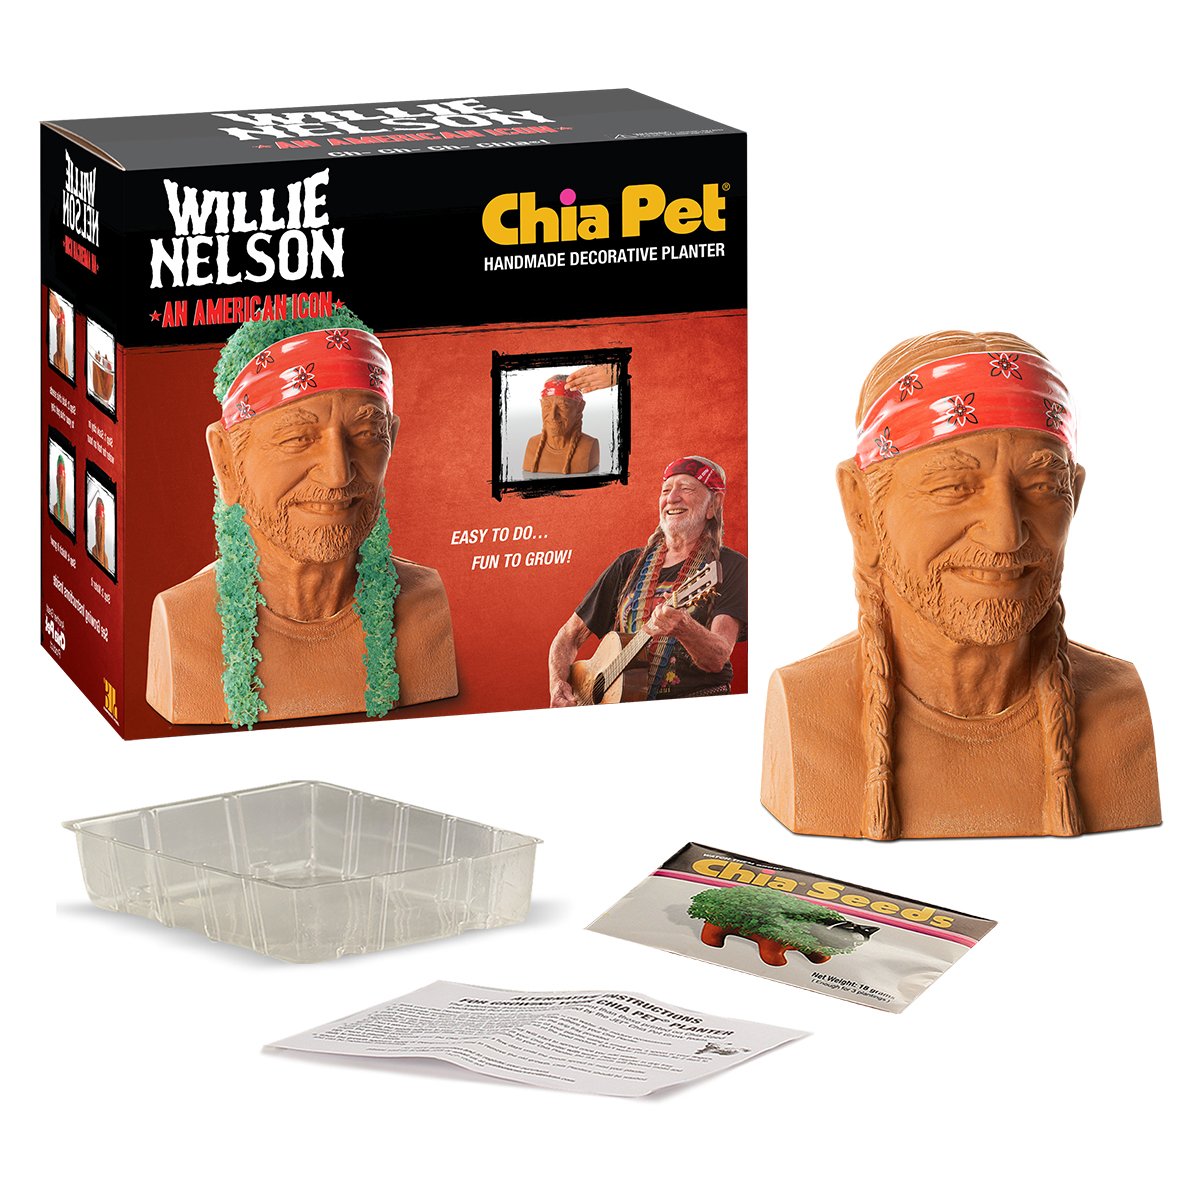 Willie Nelson Product Image (Chia Pet)